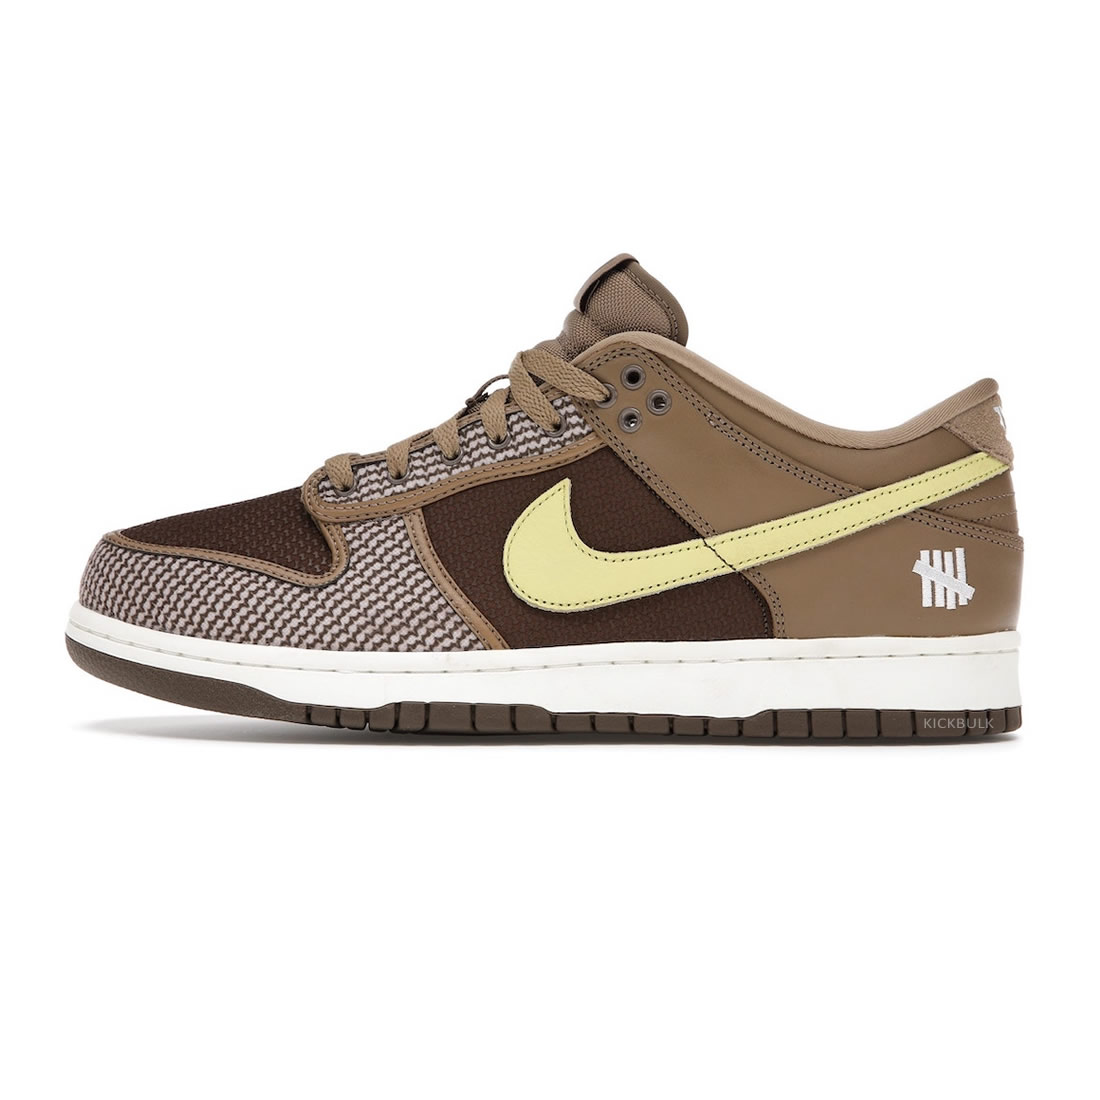 Undefeated Nike Dunk Low Sp Canteen Dh3061 200 1 - www.kickbulk.org